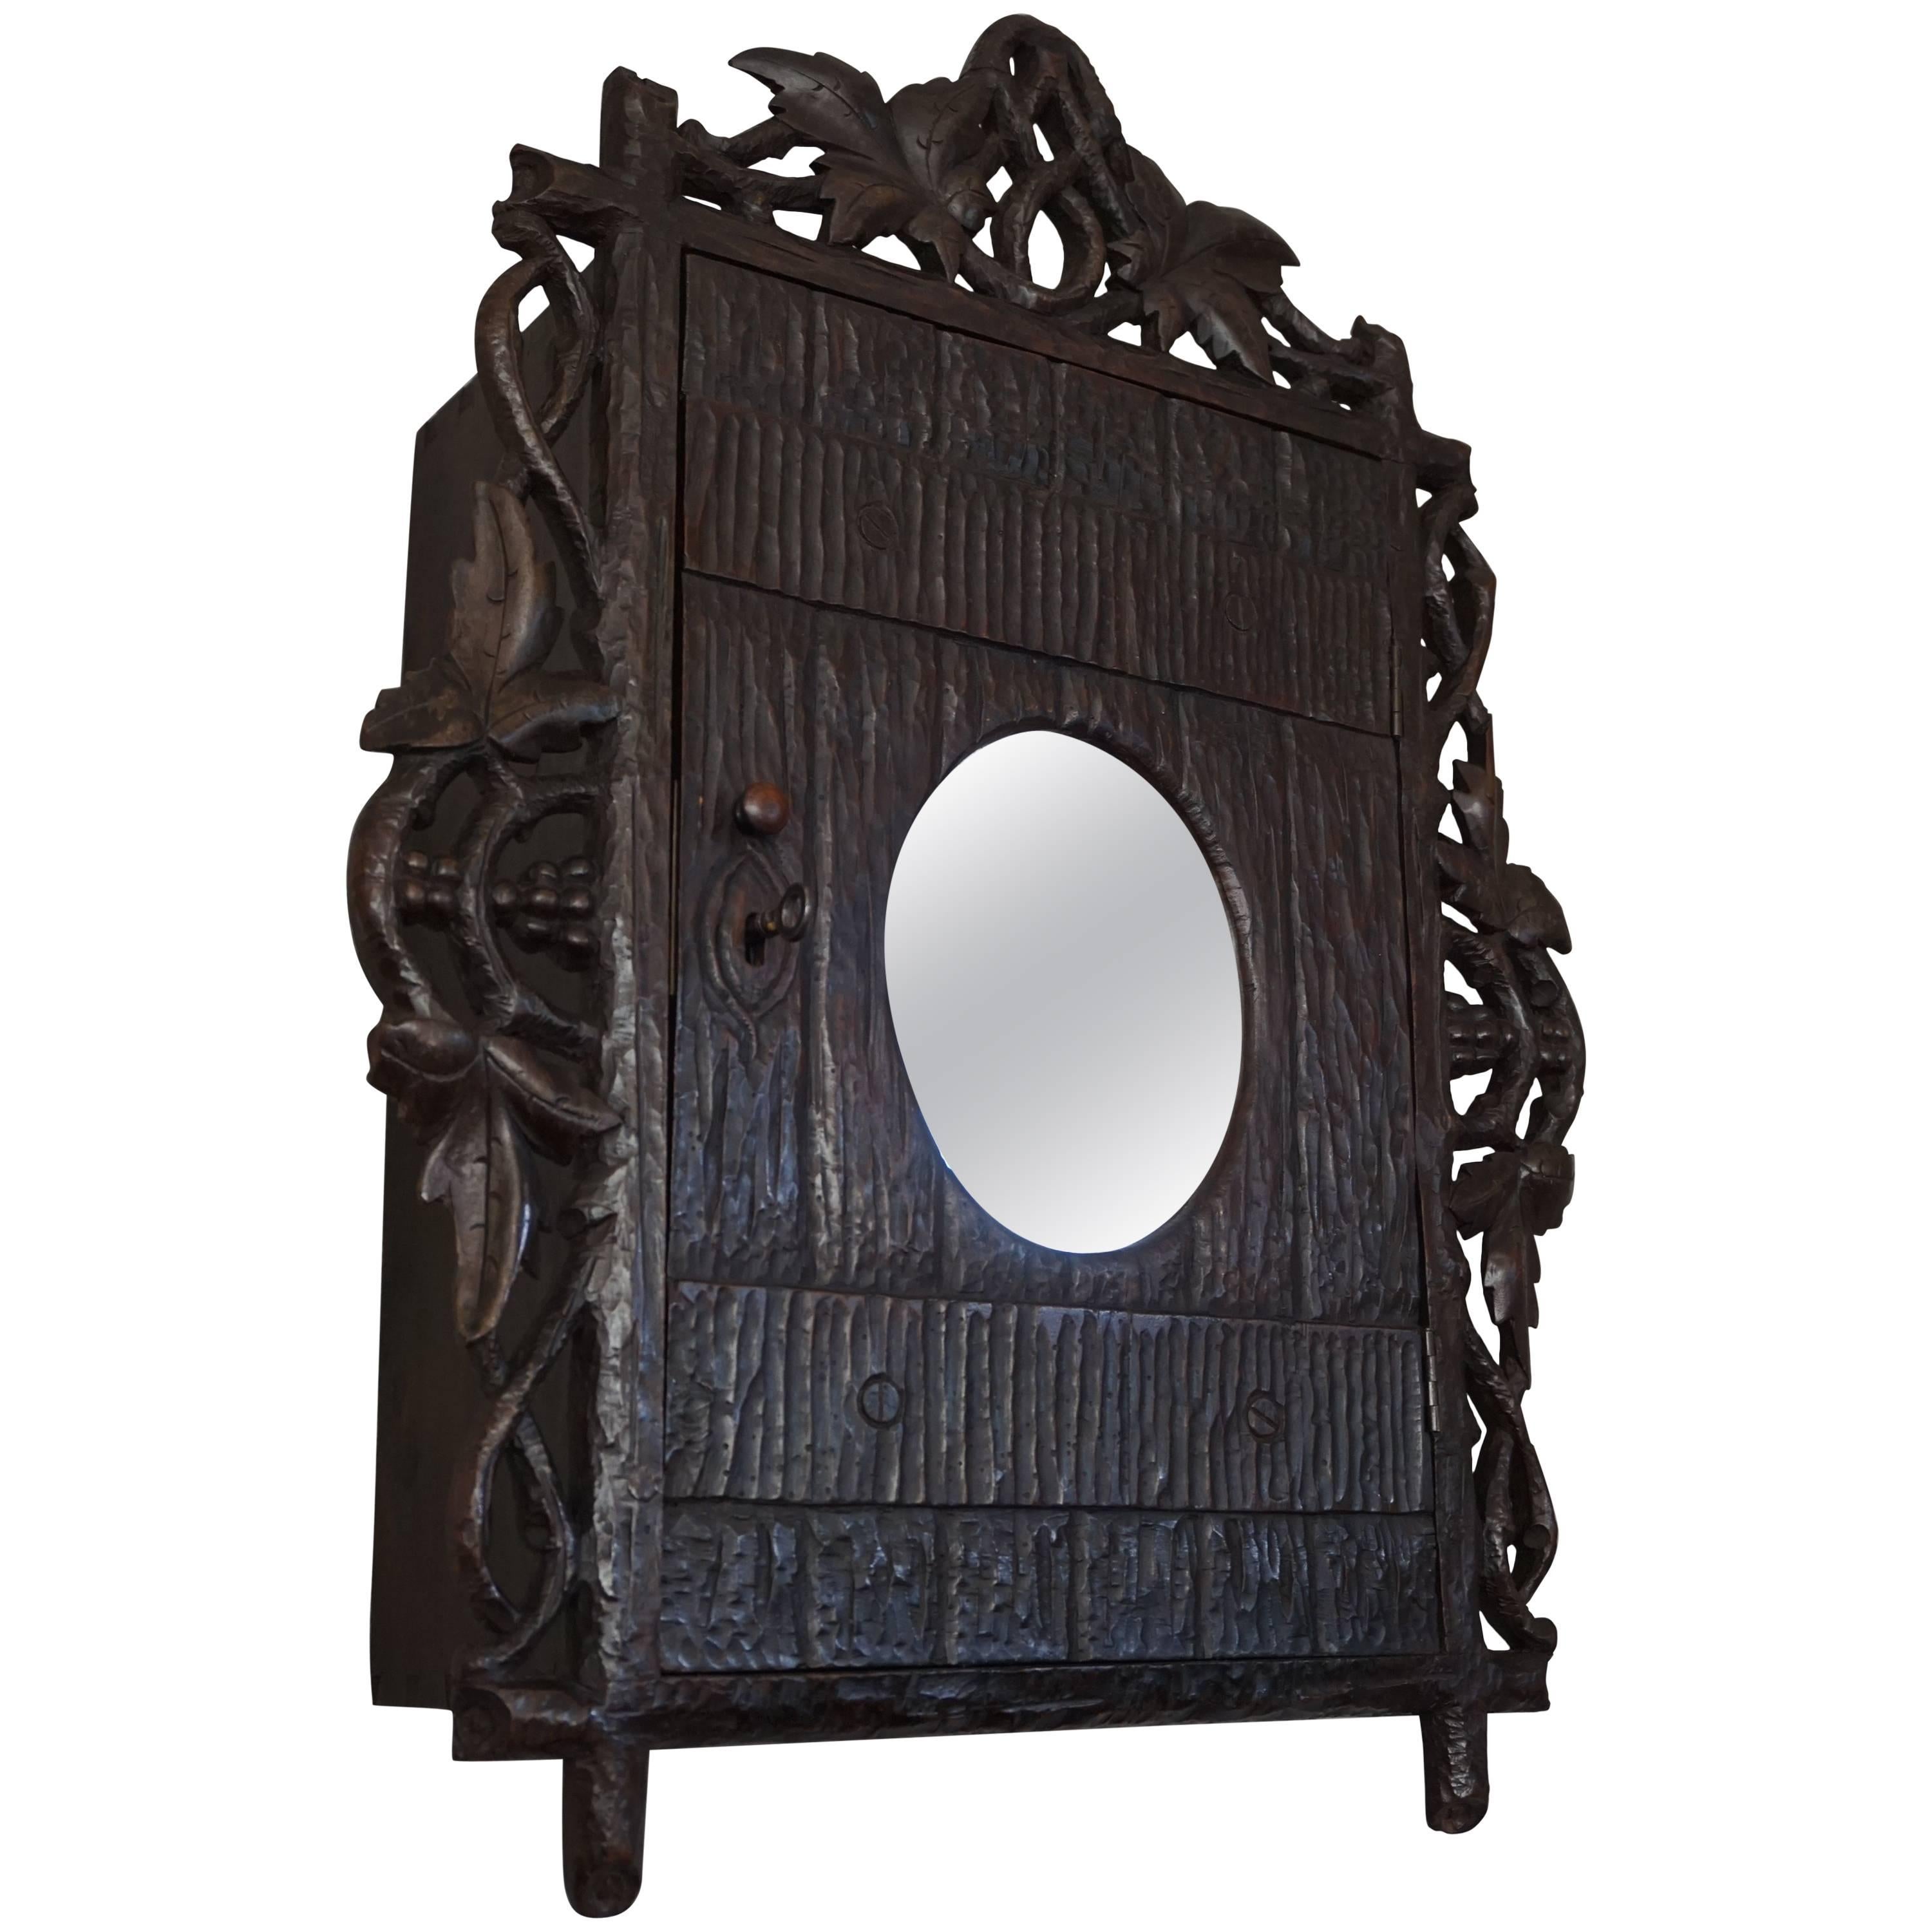 Antique and Hand-Carved Black Forest Medicine Wall Cabinet with Oval Mirror